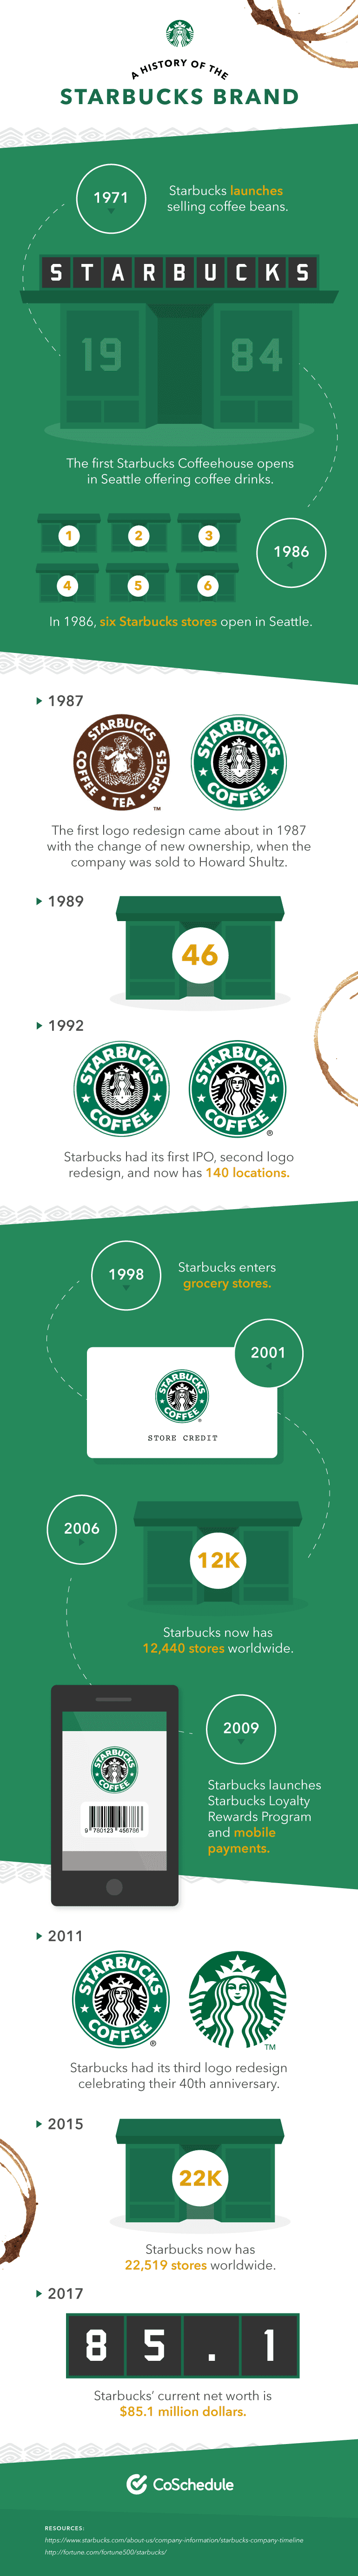 A History of the Starbucks Brand